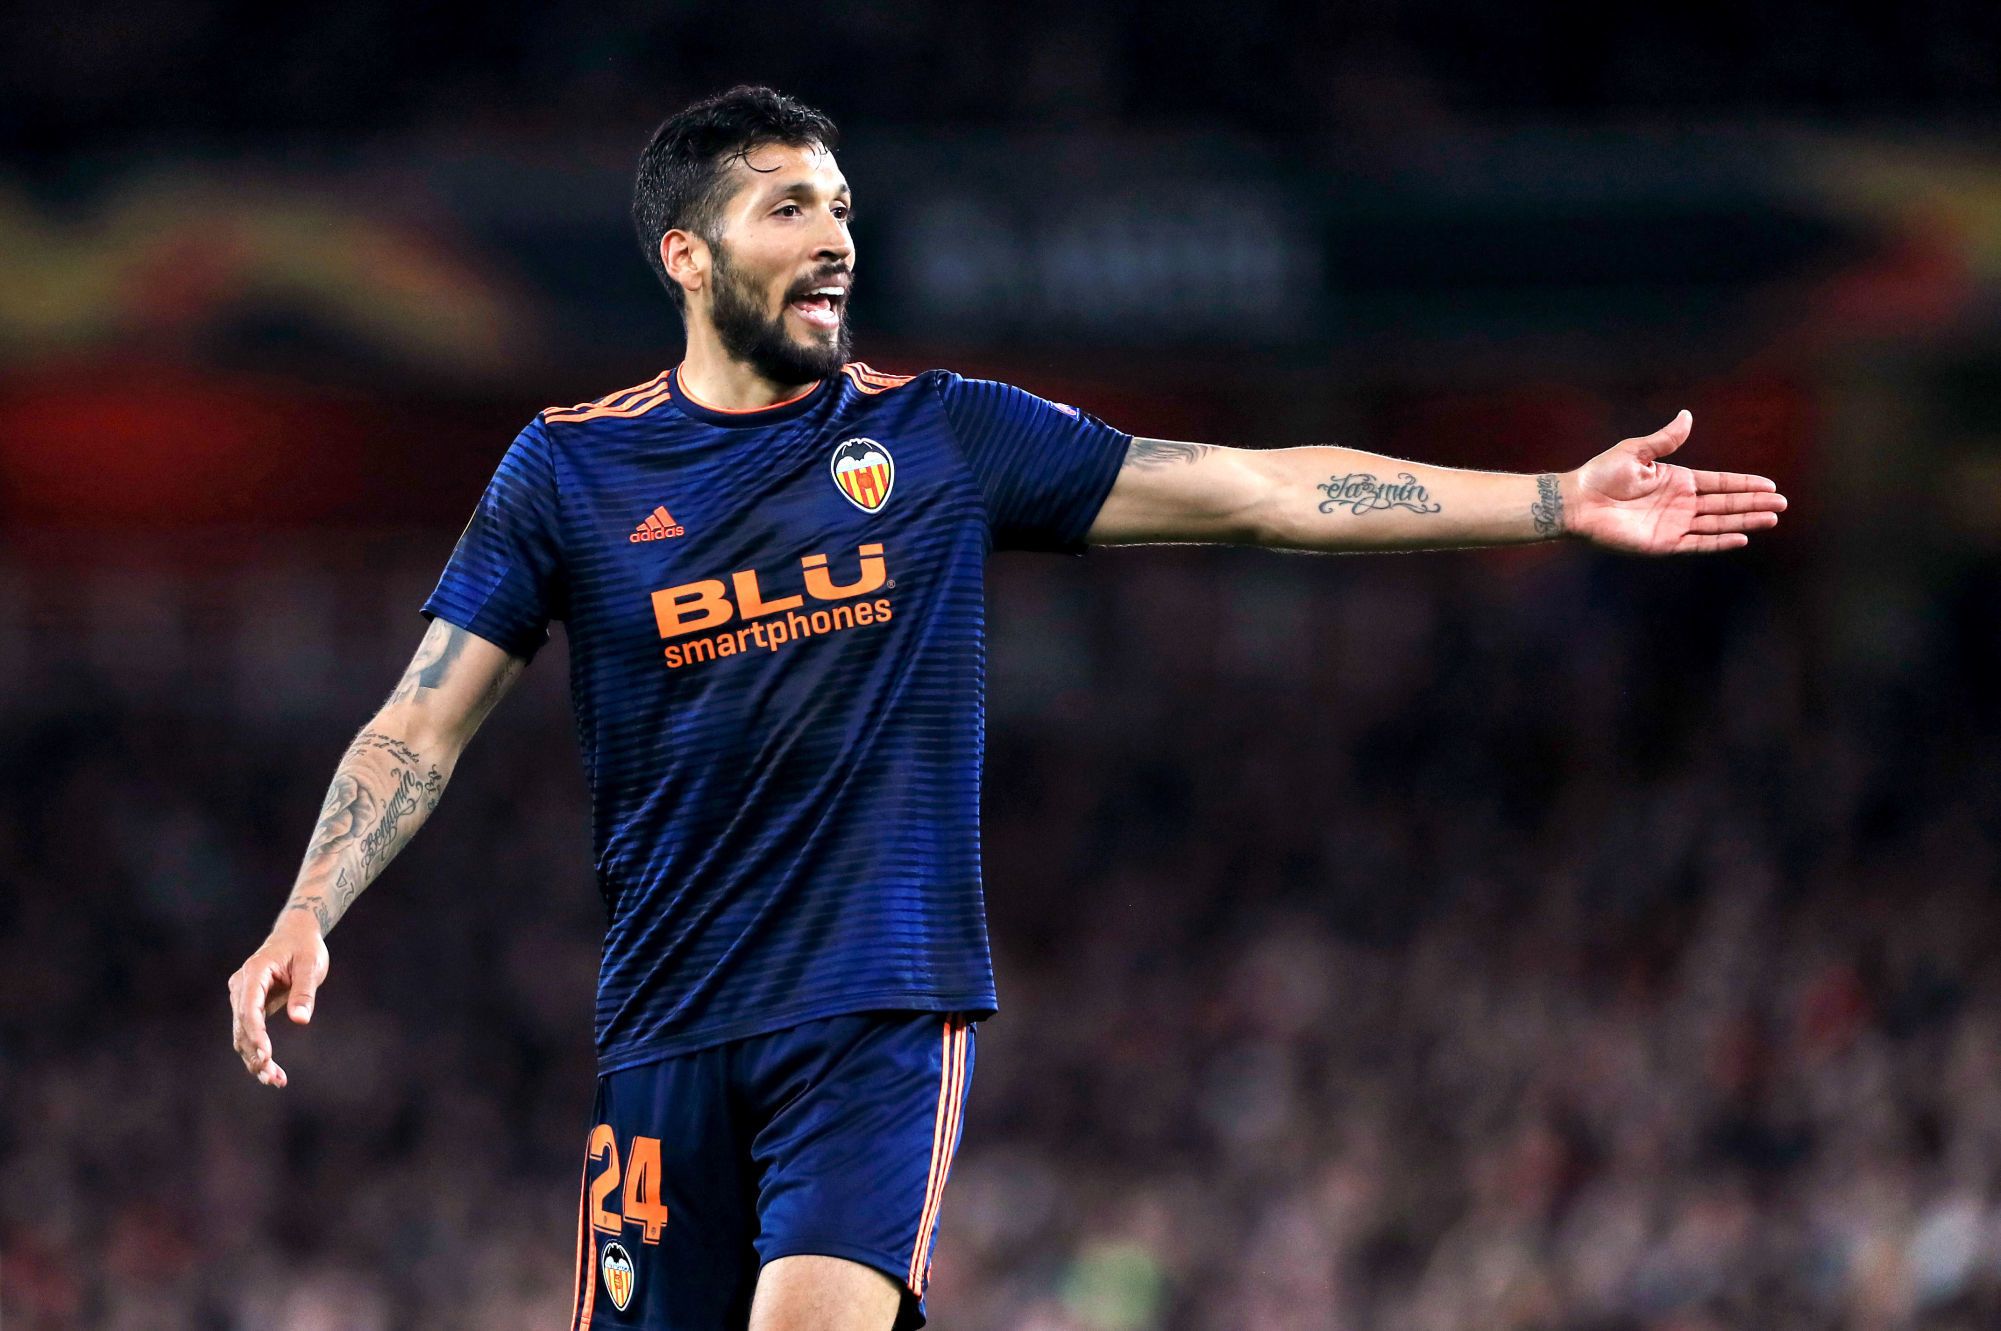 Valencia's Ezequiel Garay during the UEFA Europa League Semi final, first leg match at The Emirates Stadium, London on May 2nd, 2019. Photo : PA Images / Icon Sport